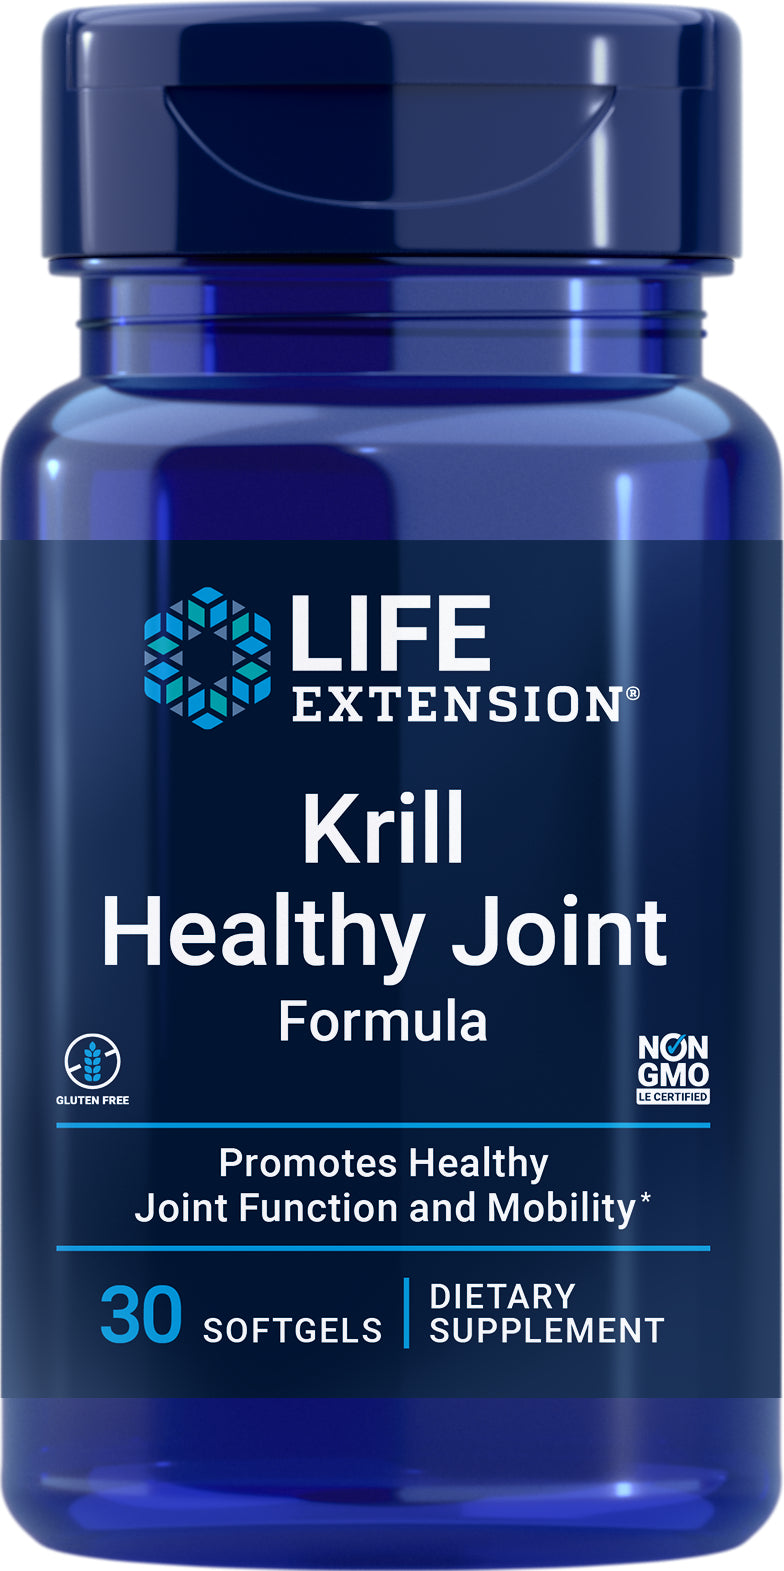 Krill Healthy Joint Formula 30 softgels by Life Extension